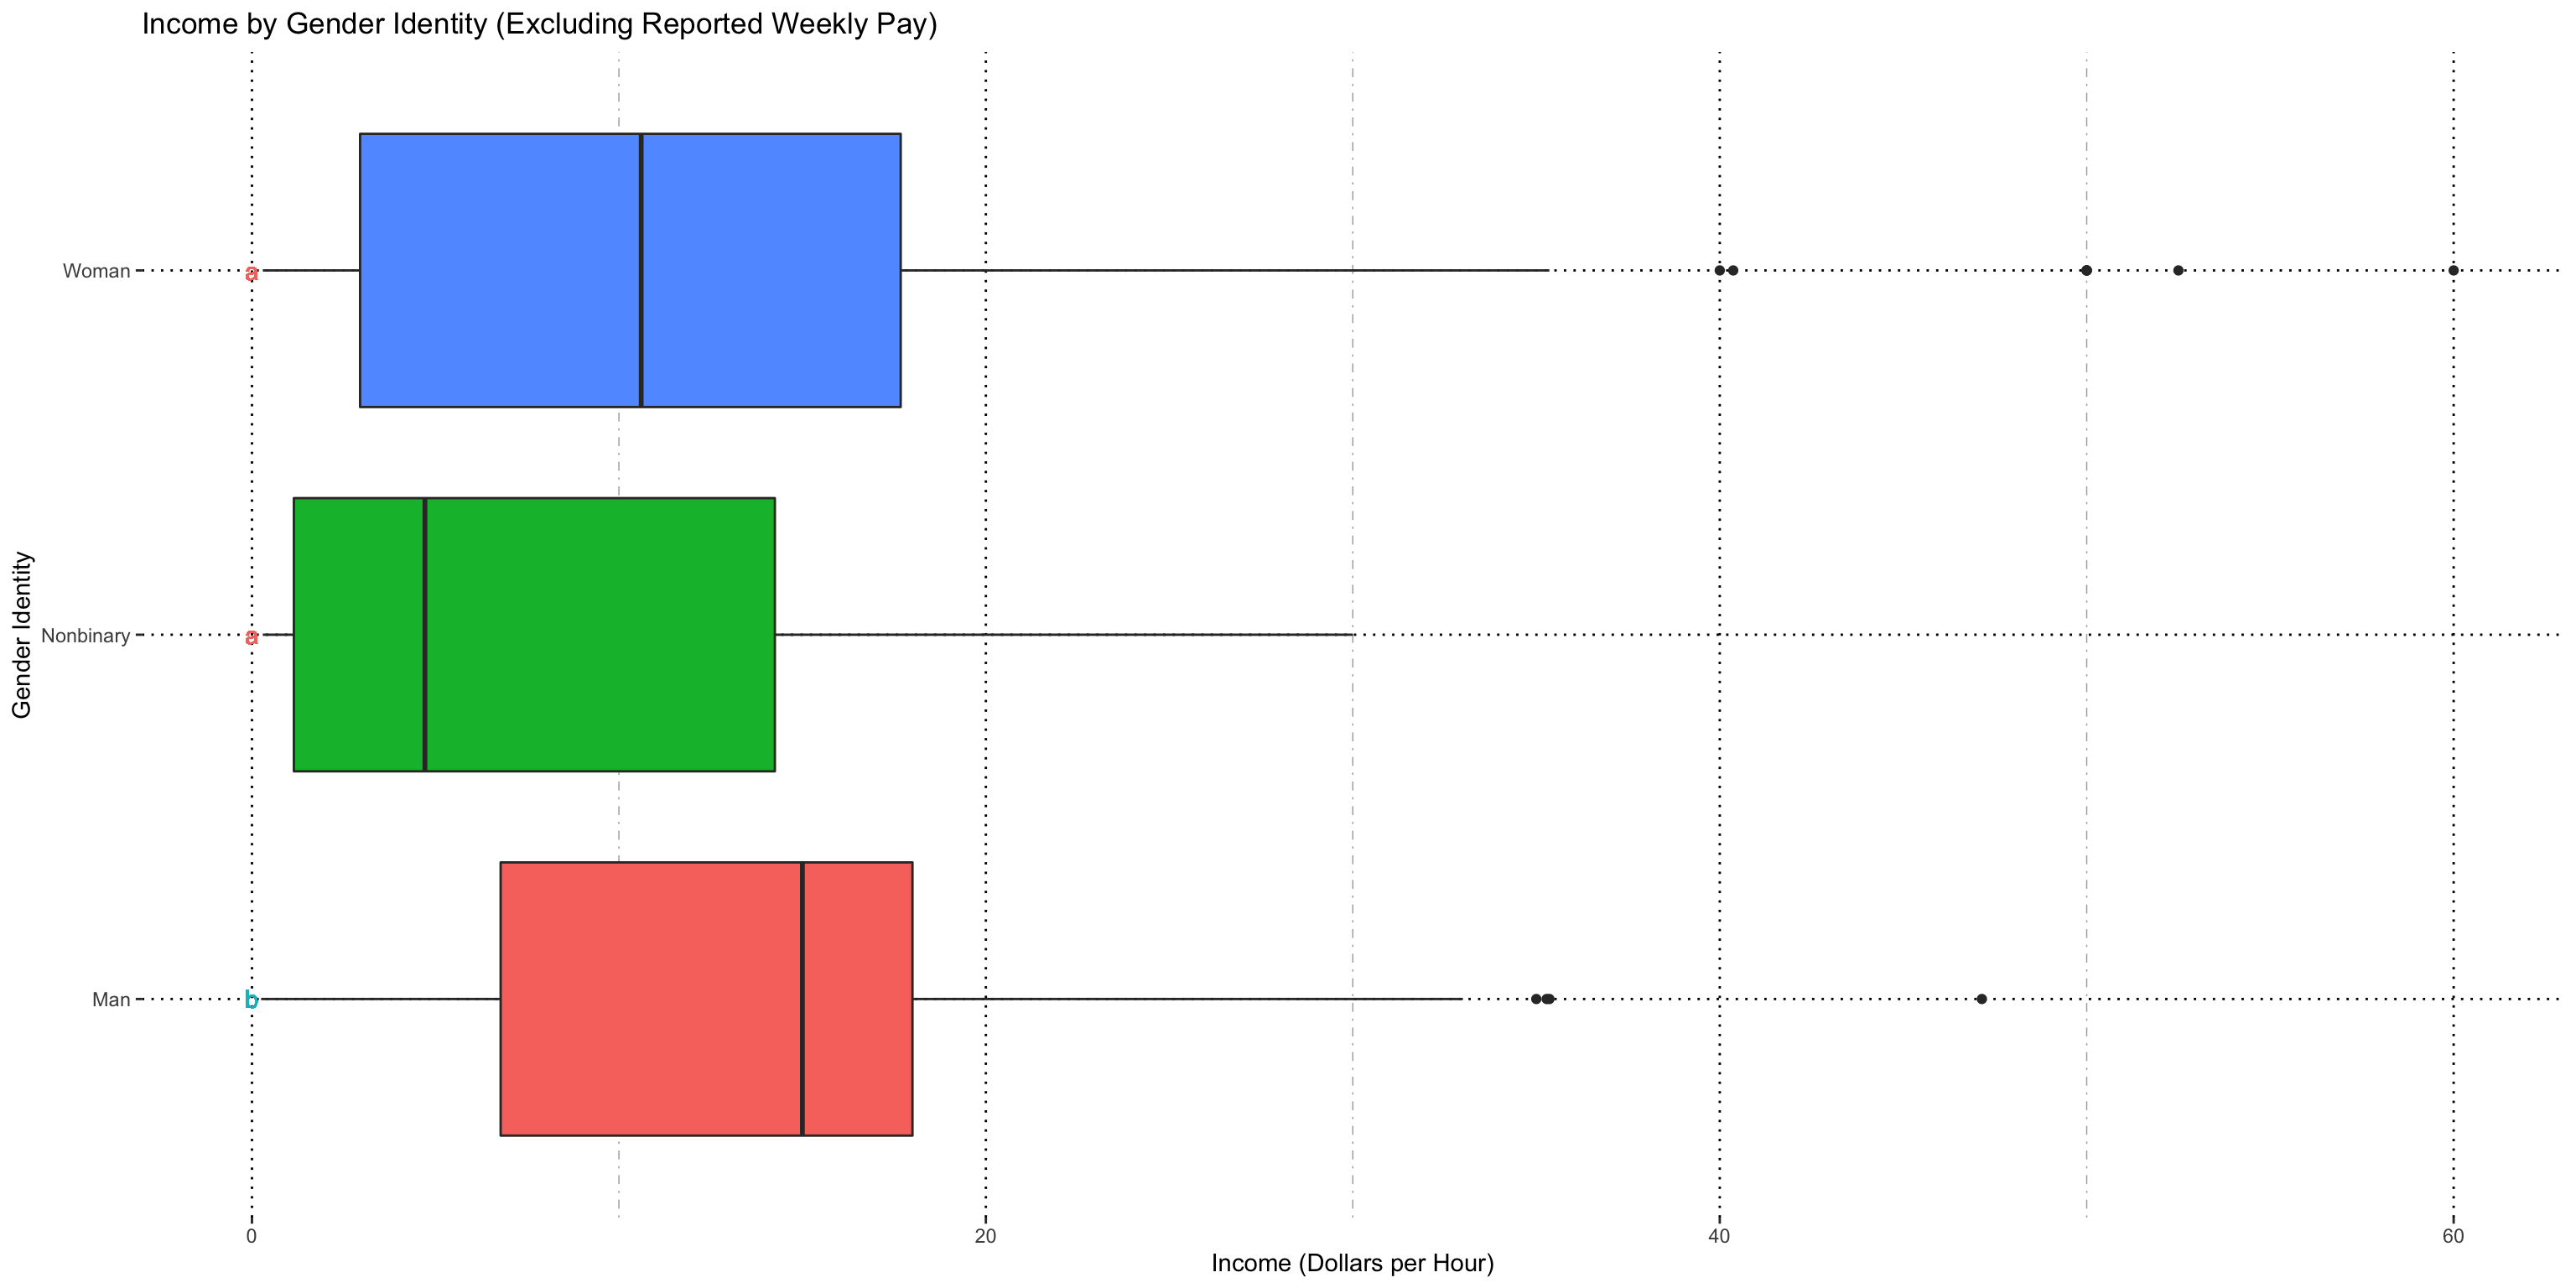 Tukey Groups and Boxplot Income by Gender (All Income except Paid Weekly)